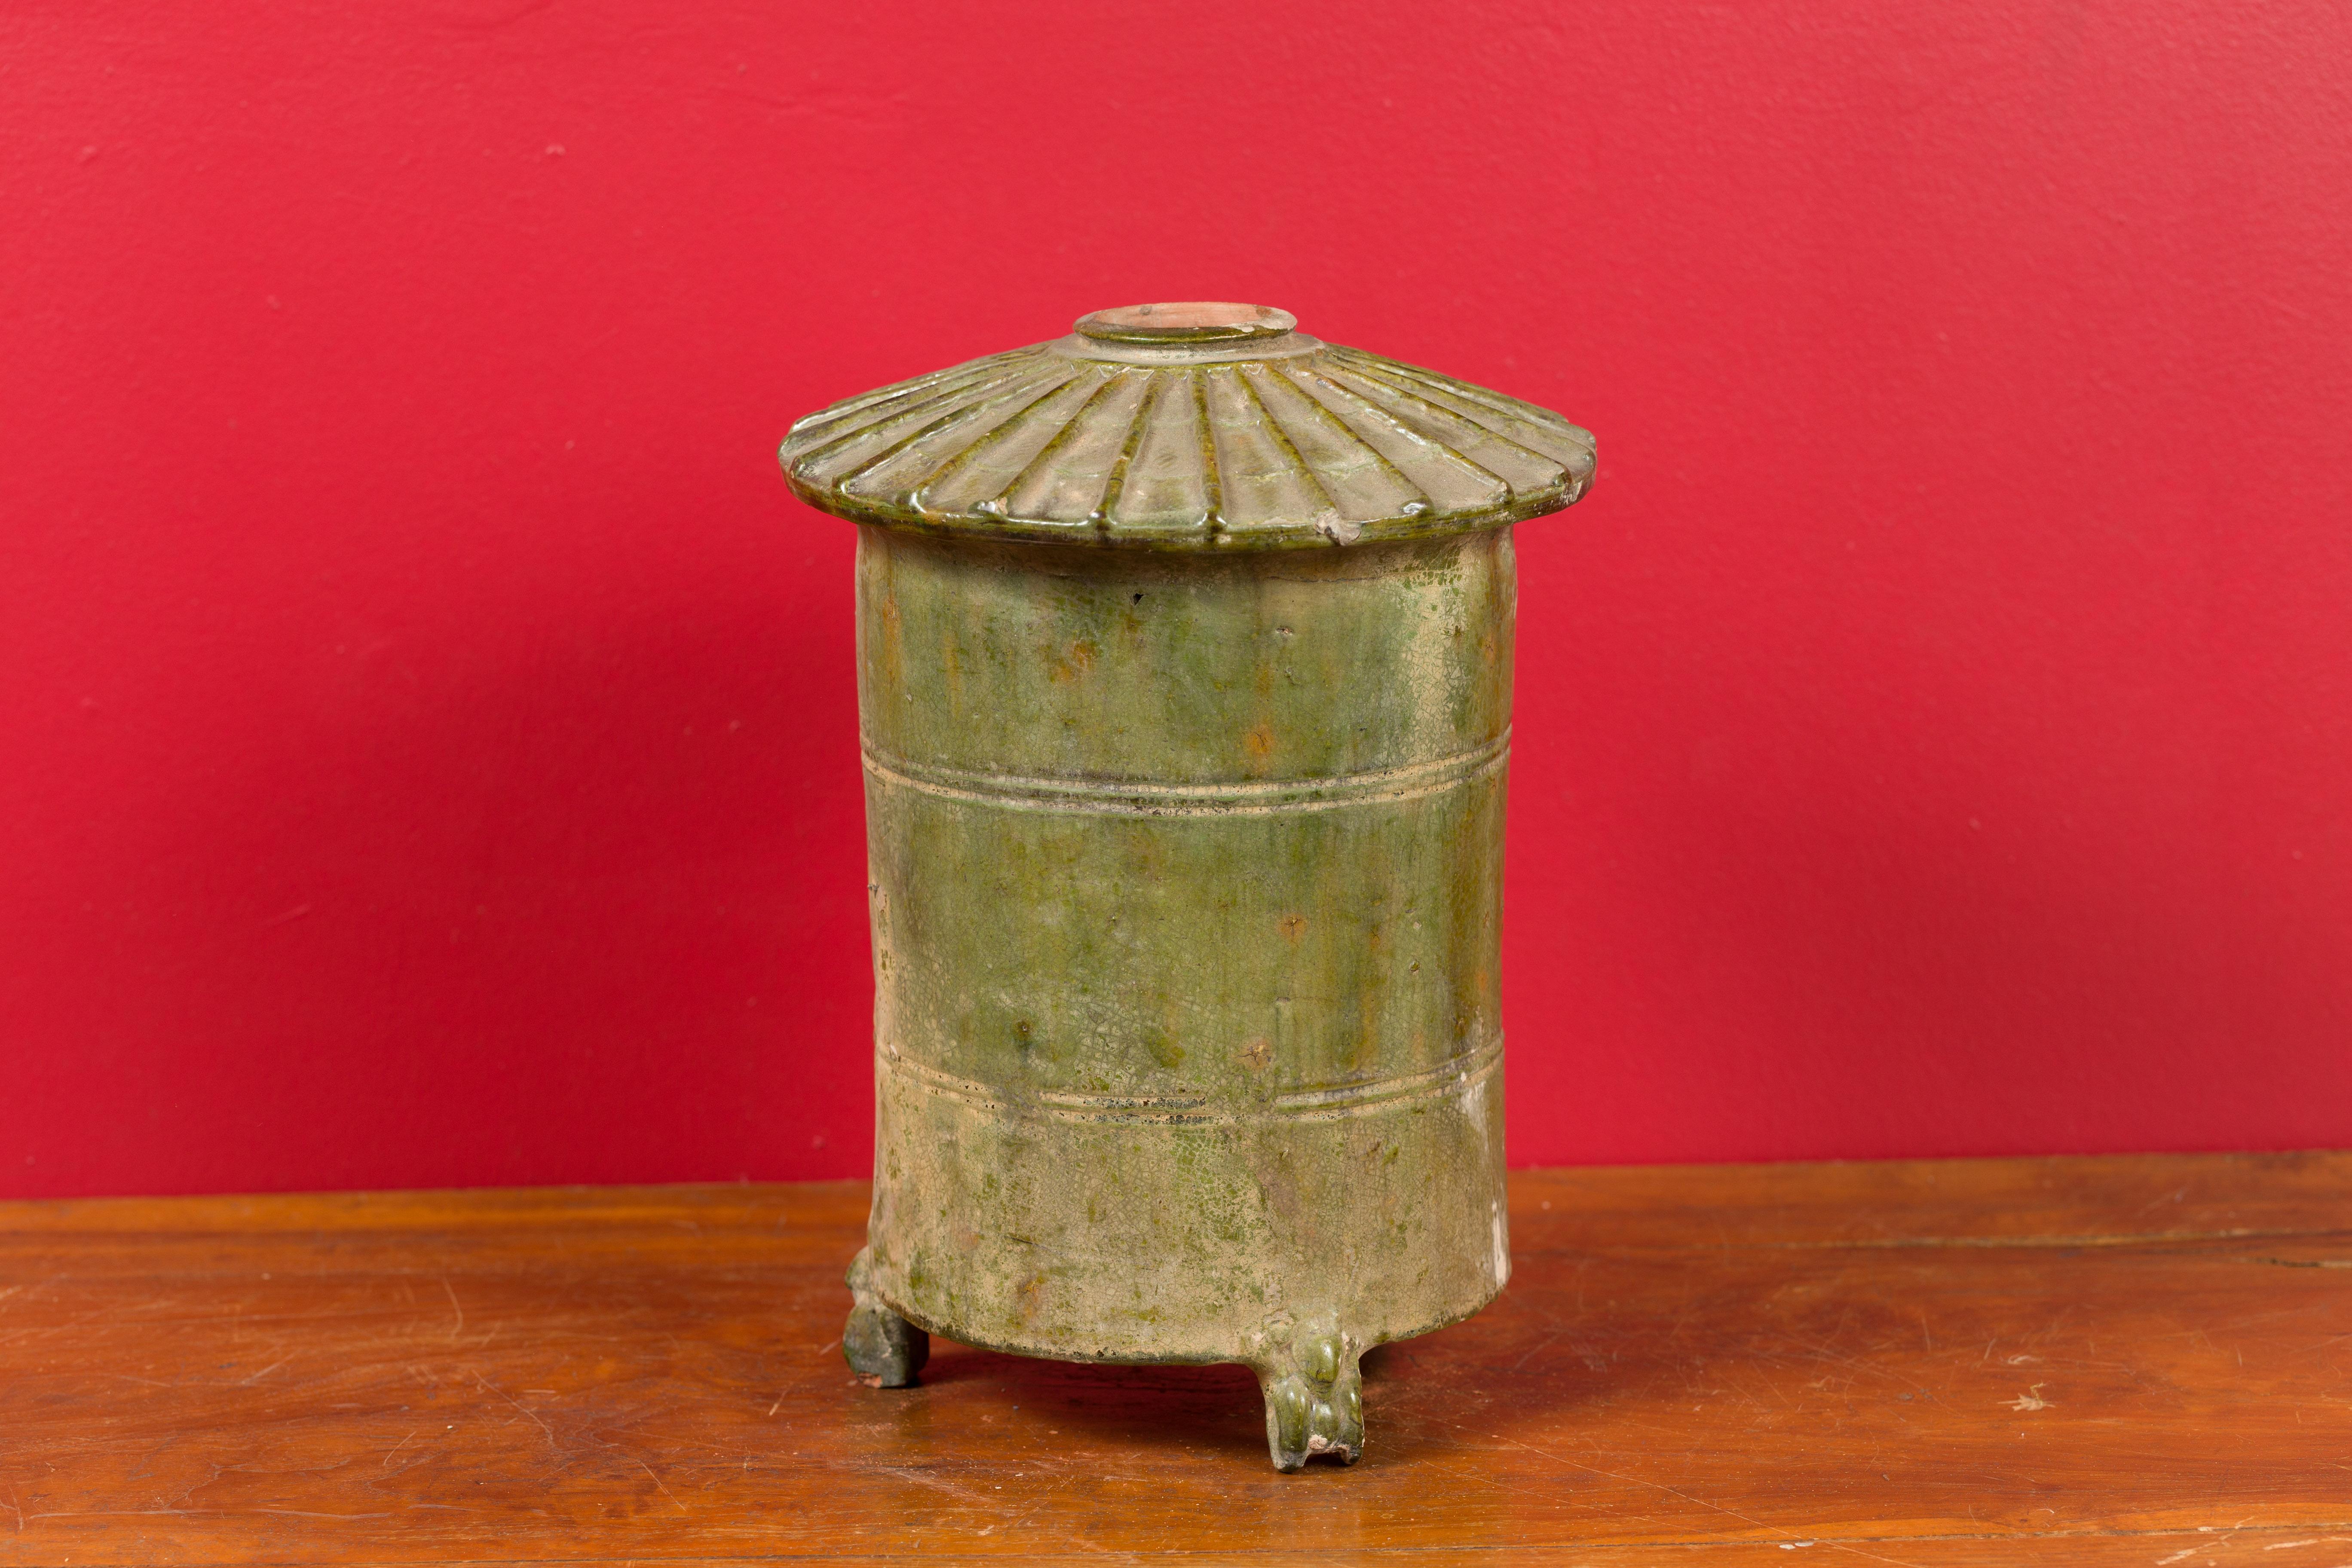 Petit Chinese Ming Dynasty 17th Century Terracotta Granary with Verdigris Patina For Sale 6